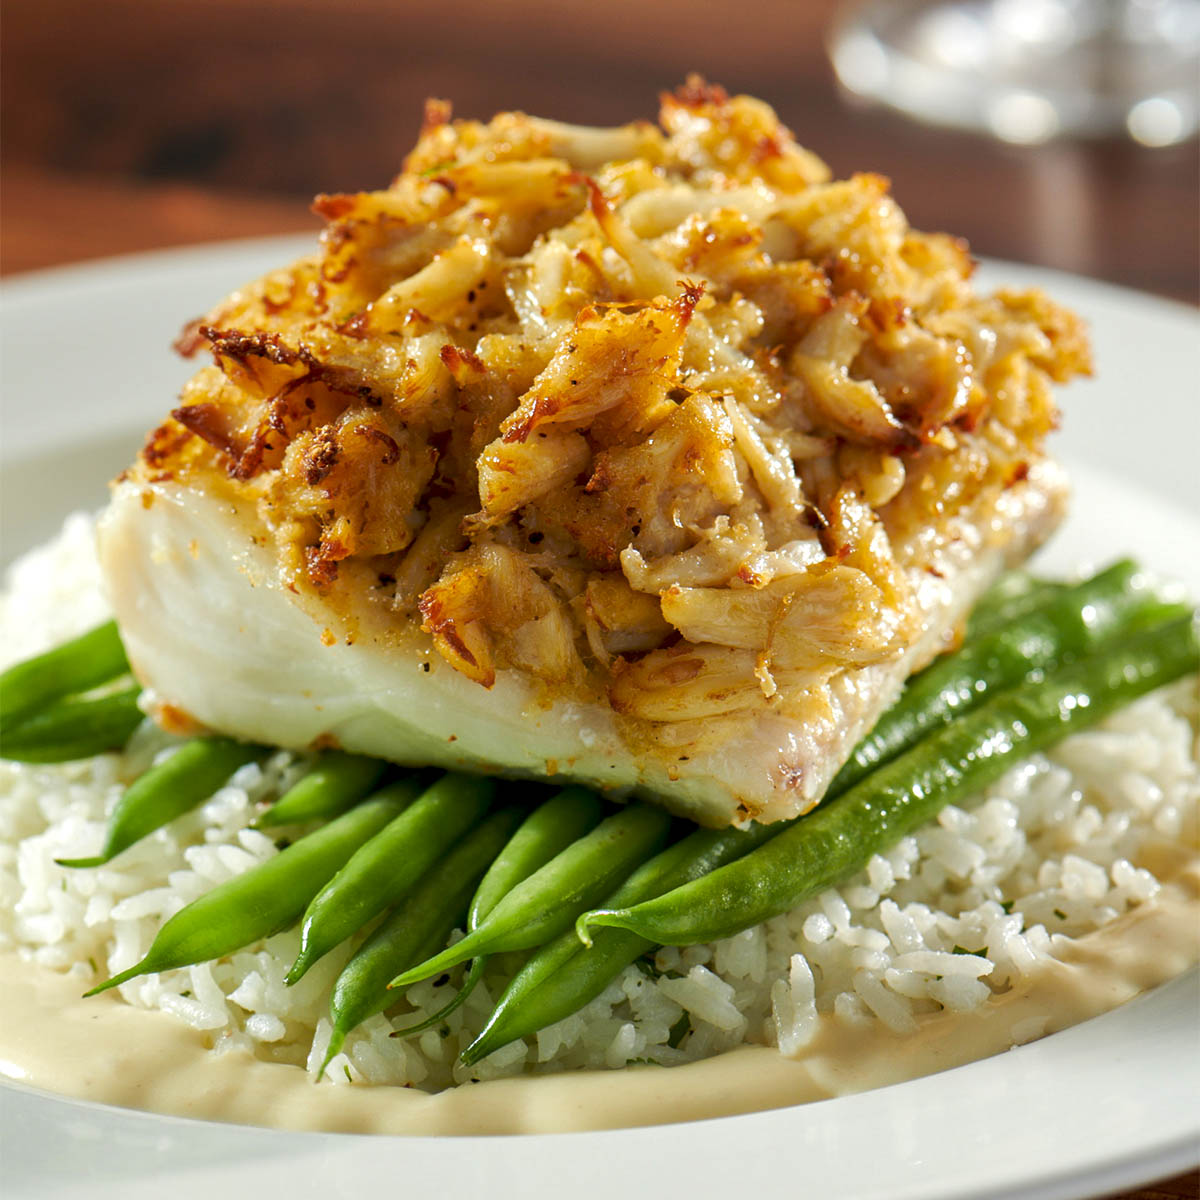 Burtons crab crusted haddock atop fresh green beans and fluffy rice at their Gaithersburg location